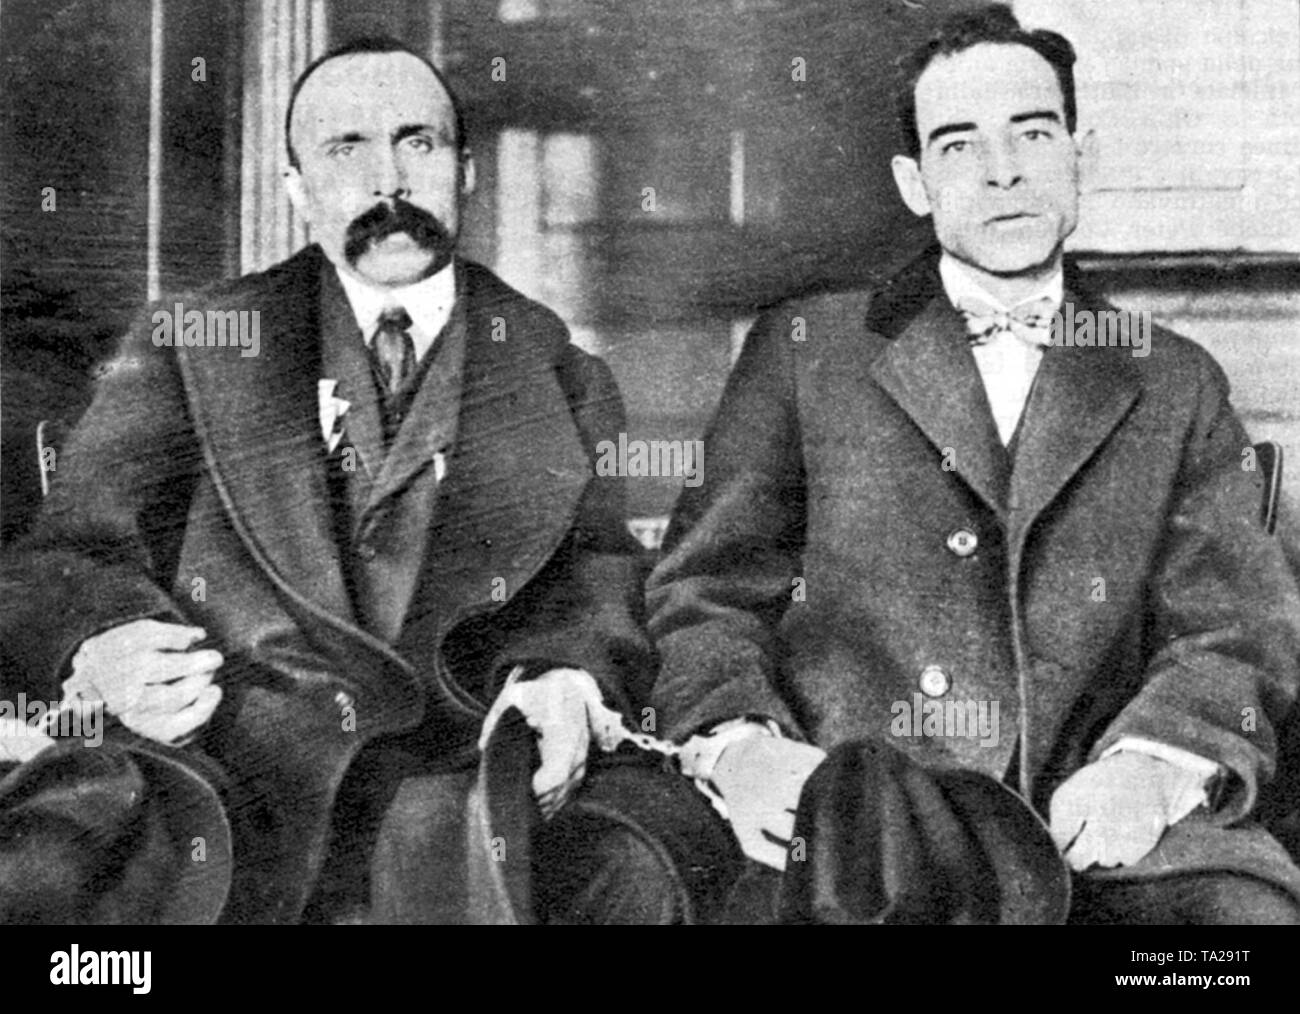 The two Italian anarchists Bartolomeo Vanzetti (left) and Nicola Sacco were sentenced to death and executed in the United States in 1927 'for communist activities' - despite worldwide protests regarding the process and its background. The question of fault remains unsettled until today. Both denied the allegations until the end. Our photo shows the condemned shortly before their execution. Stock Photo